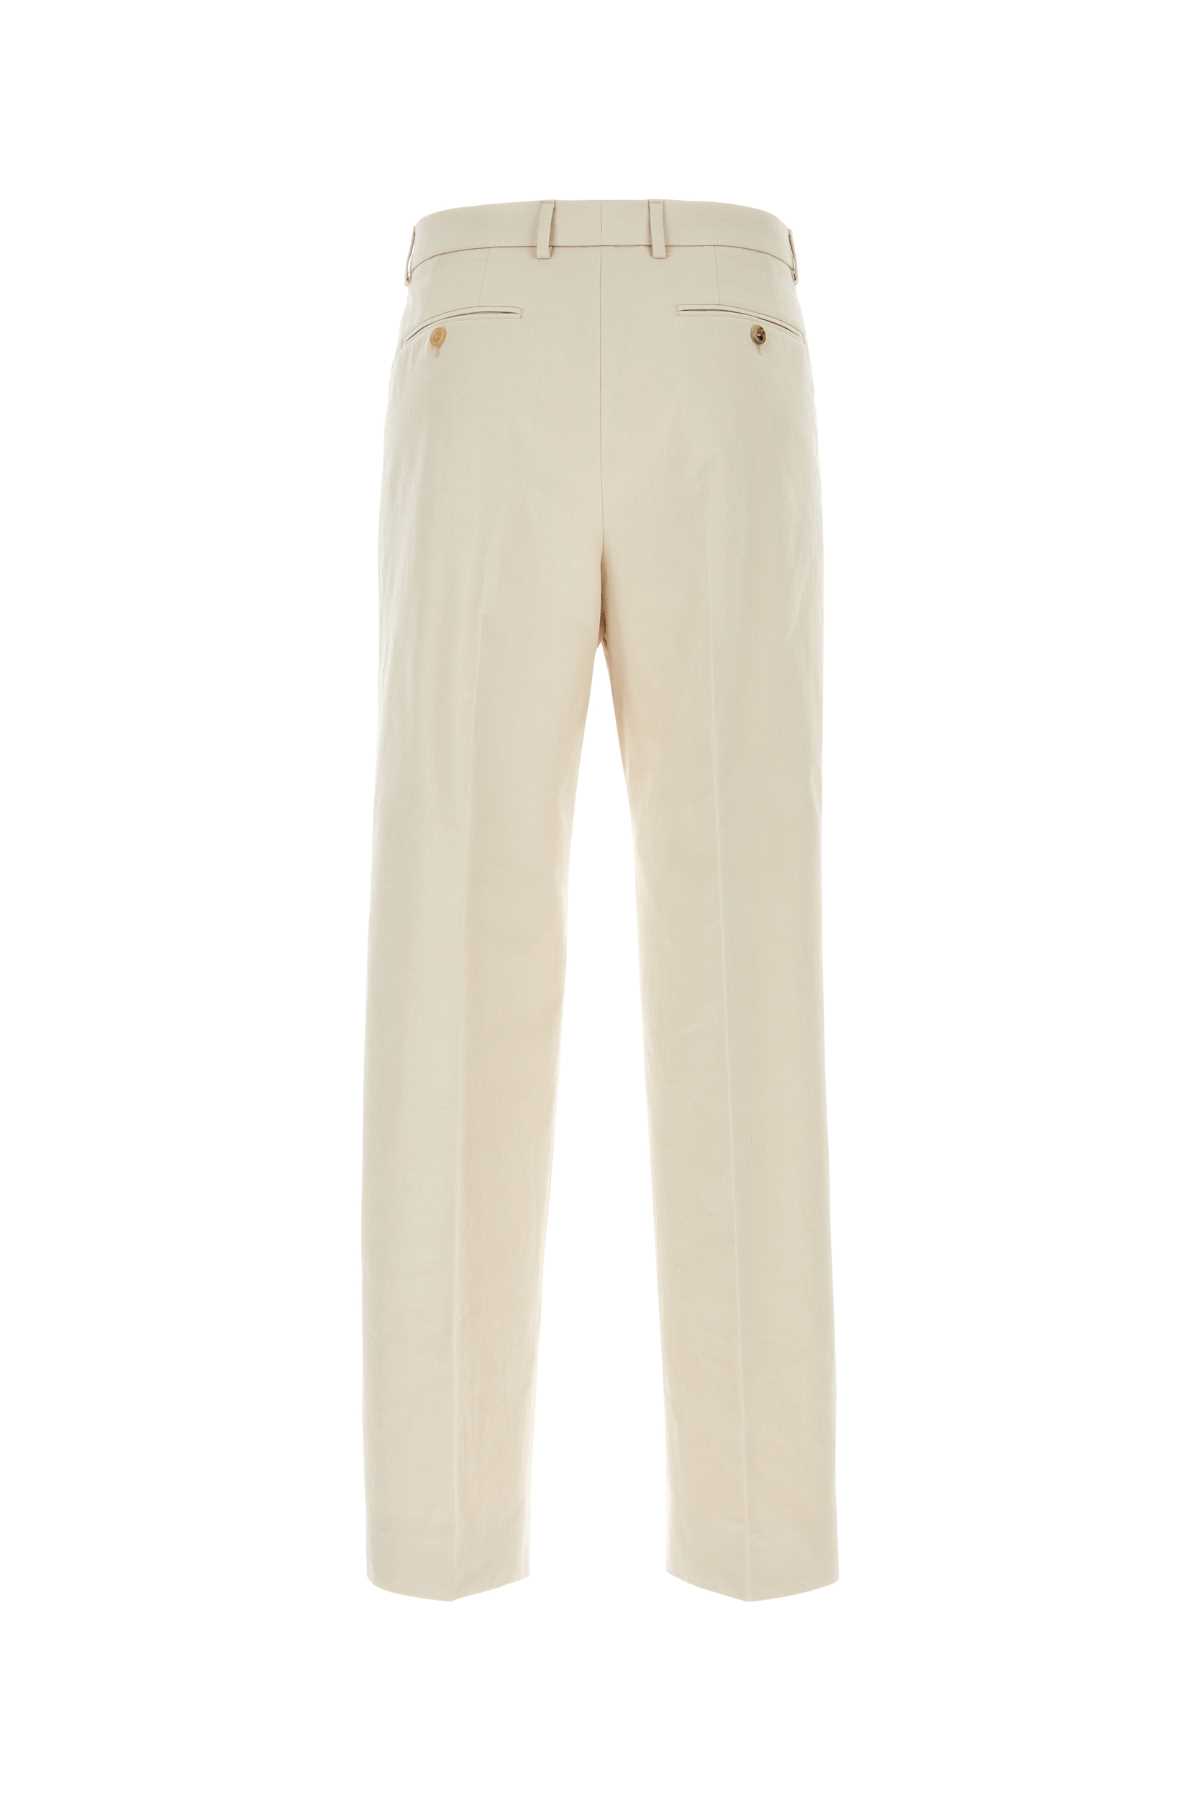 Gucci Sand Cotton Pant In Wht